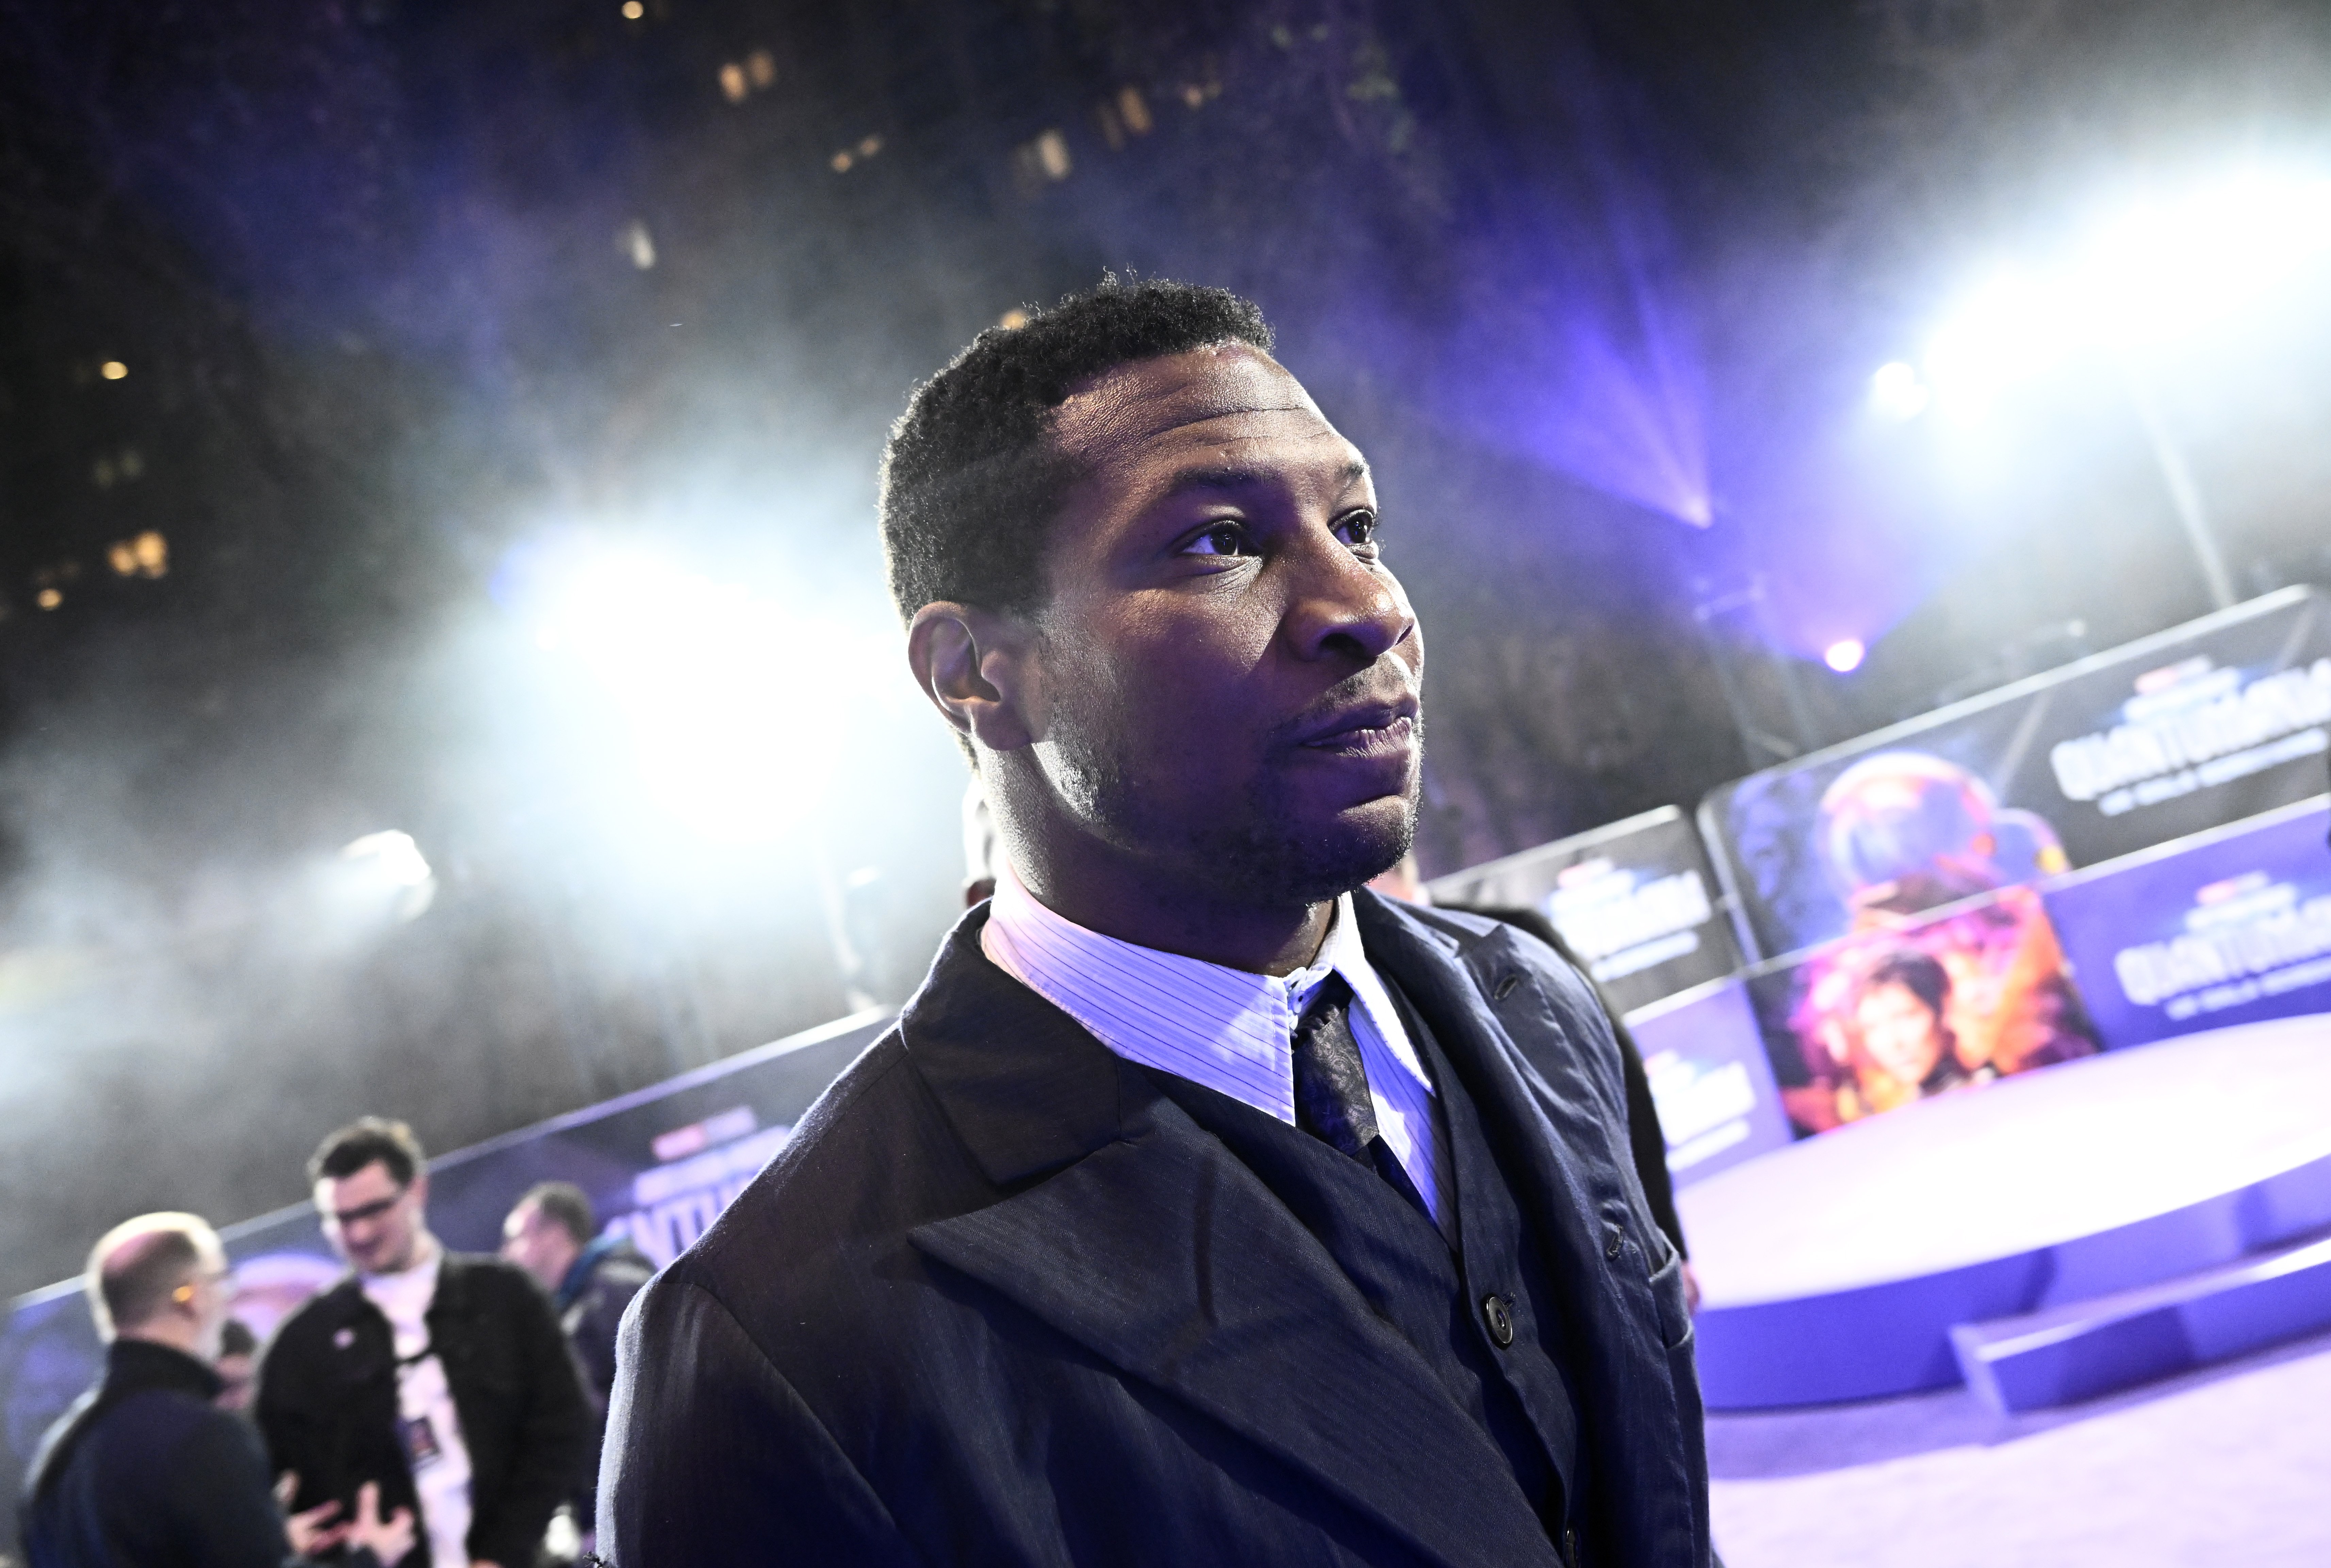 Jonathan Majors at the UK Gala Screening of "Ant-Man and the Wasp: Quantumania," at BFI IMAX Waterloo in London, England, on February 16, 2023. | Source: Getty Images